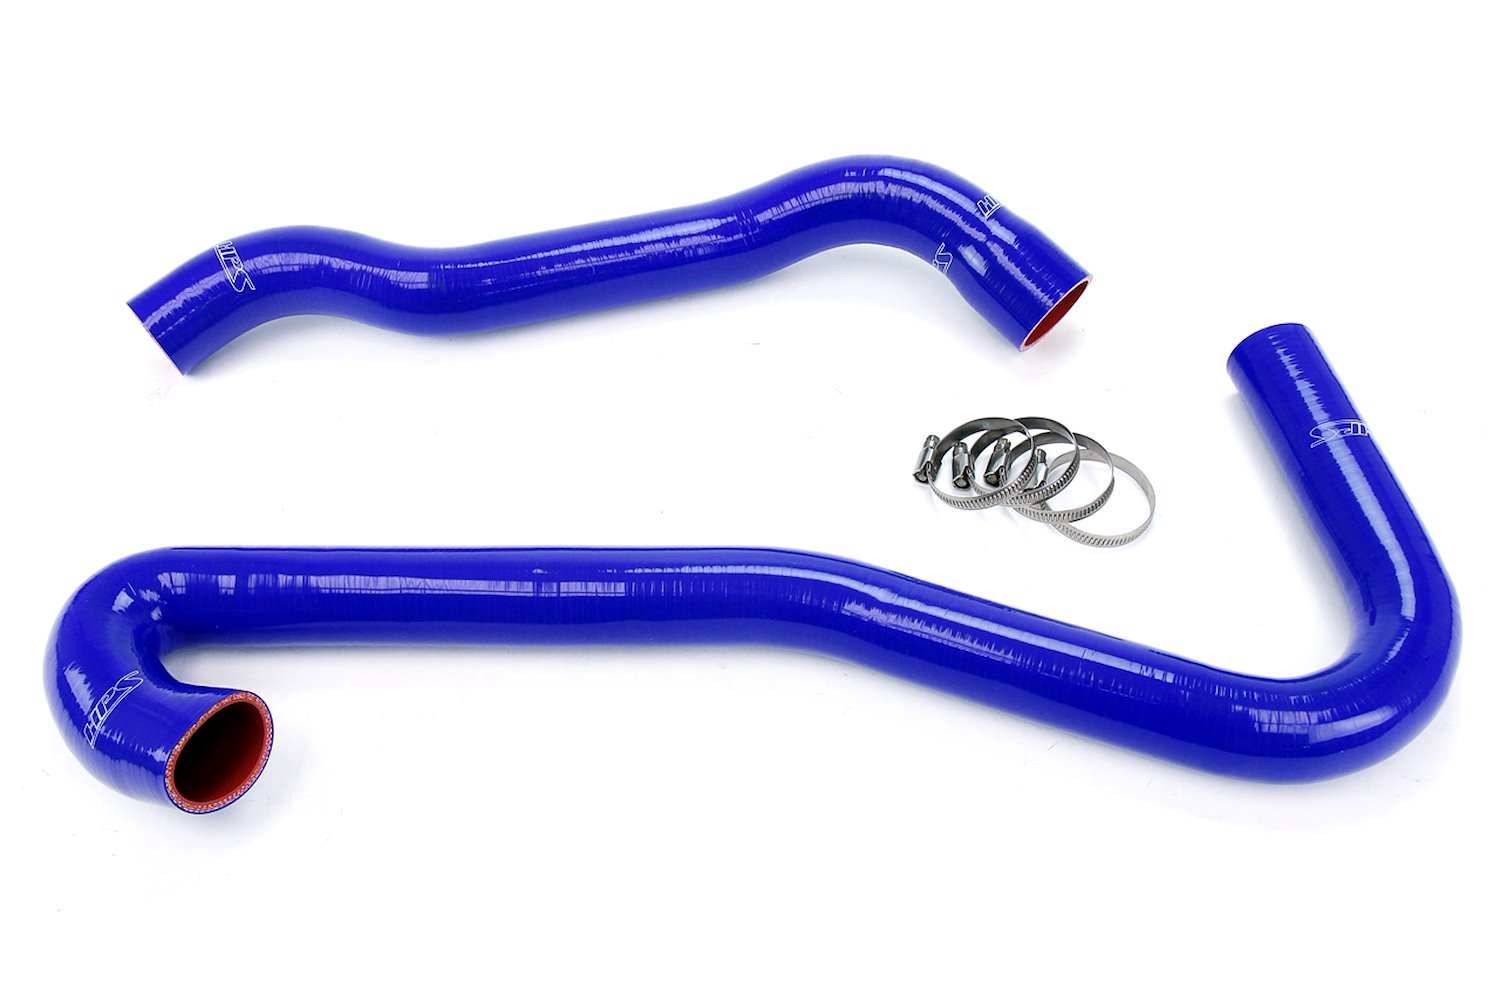 57-1453-BLUE Radiator Hose Kit, High-Temp 3-Ply Reinforced Silicone, Replace OEM Rubber Radiator Coolant Hoses